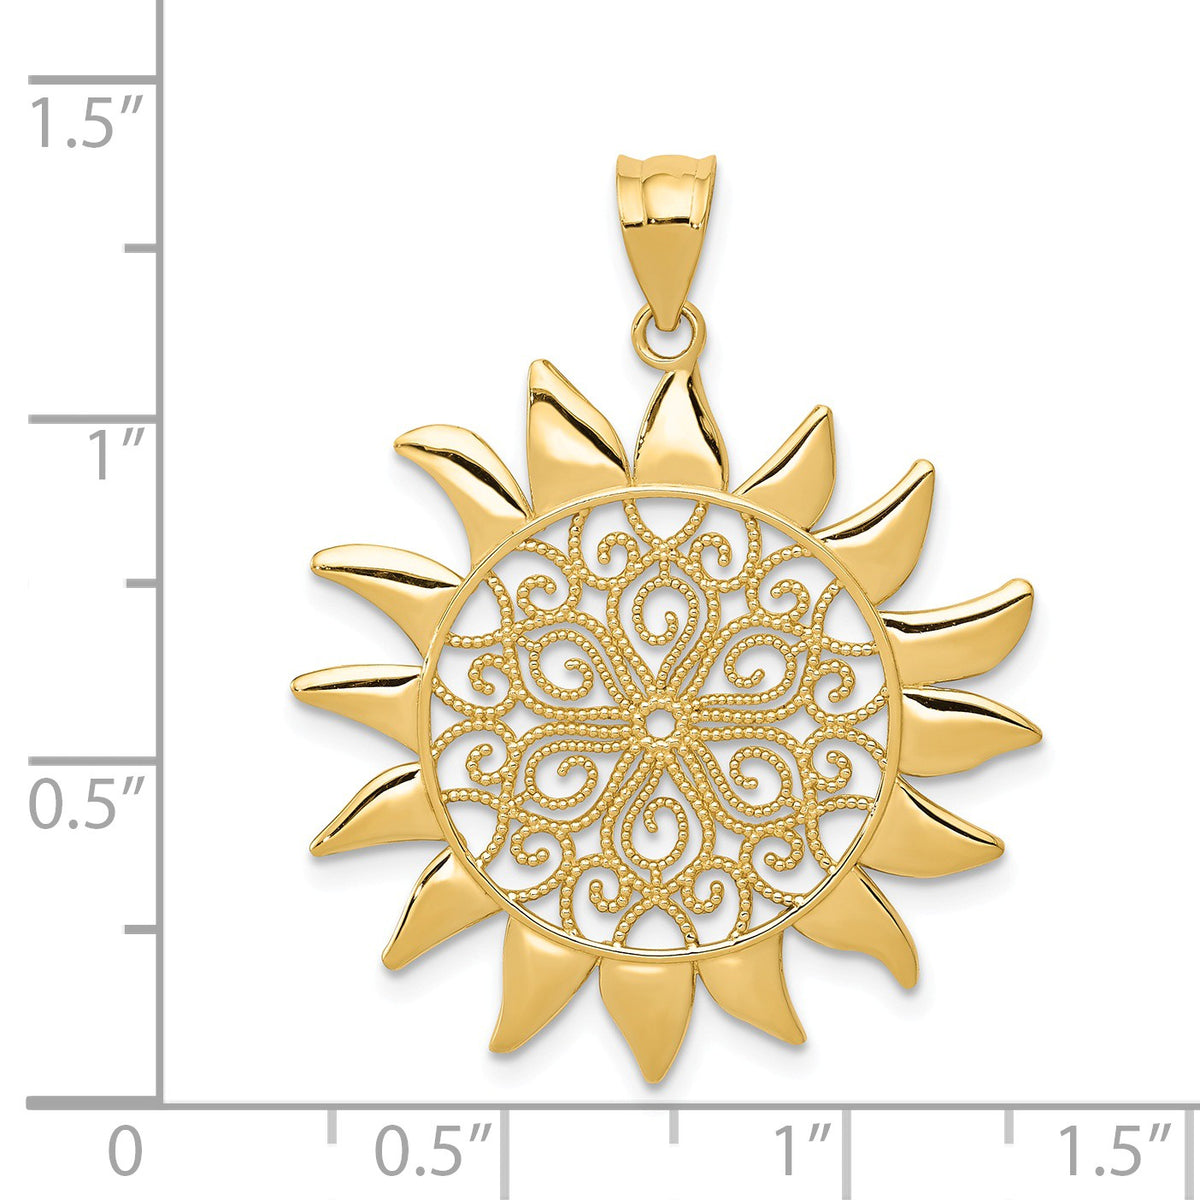 Alternate view of the 14k Yellow Gold 27mm Filigree Sun Pendant by The Black Bow Jewelry Co.